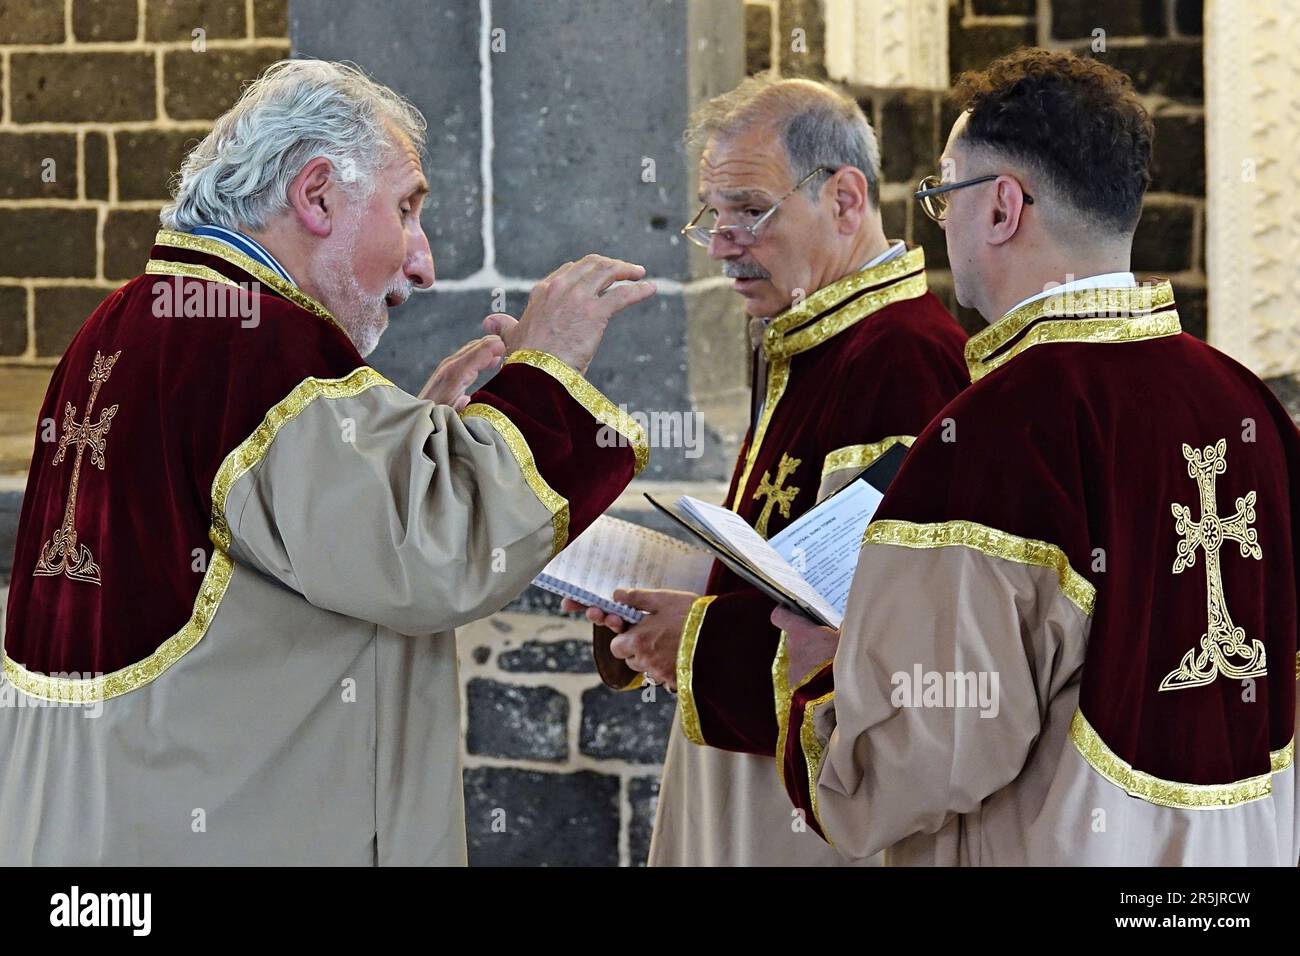 Subordinate Deacon Jan Acemoglu (L) and his two friends are seen reciting hymns during the ritual at Diyarbak?r Surp Hovsep Church. At the Surp Hovsep Armenian Catholic Church, which was heavily damaged in clashes between armed Kurdish PKK militants and Turkish security forces in the center of Diyarbakir in 2015 and repaired as a result of a 4-year restoration, the second ritual in the last 100 years after the first ritual in 2021. Very few Armenians who came from Istanbul and lived in Diyarbakir attended the ceremony. The ritual was led by Senior Priest Abraham Firat and Subordinate Deacon Ja Stock Photo